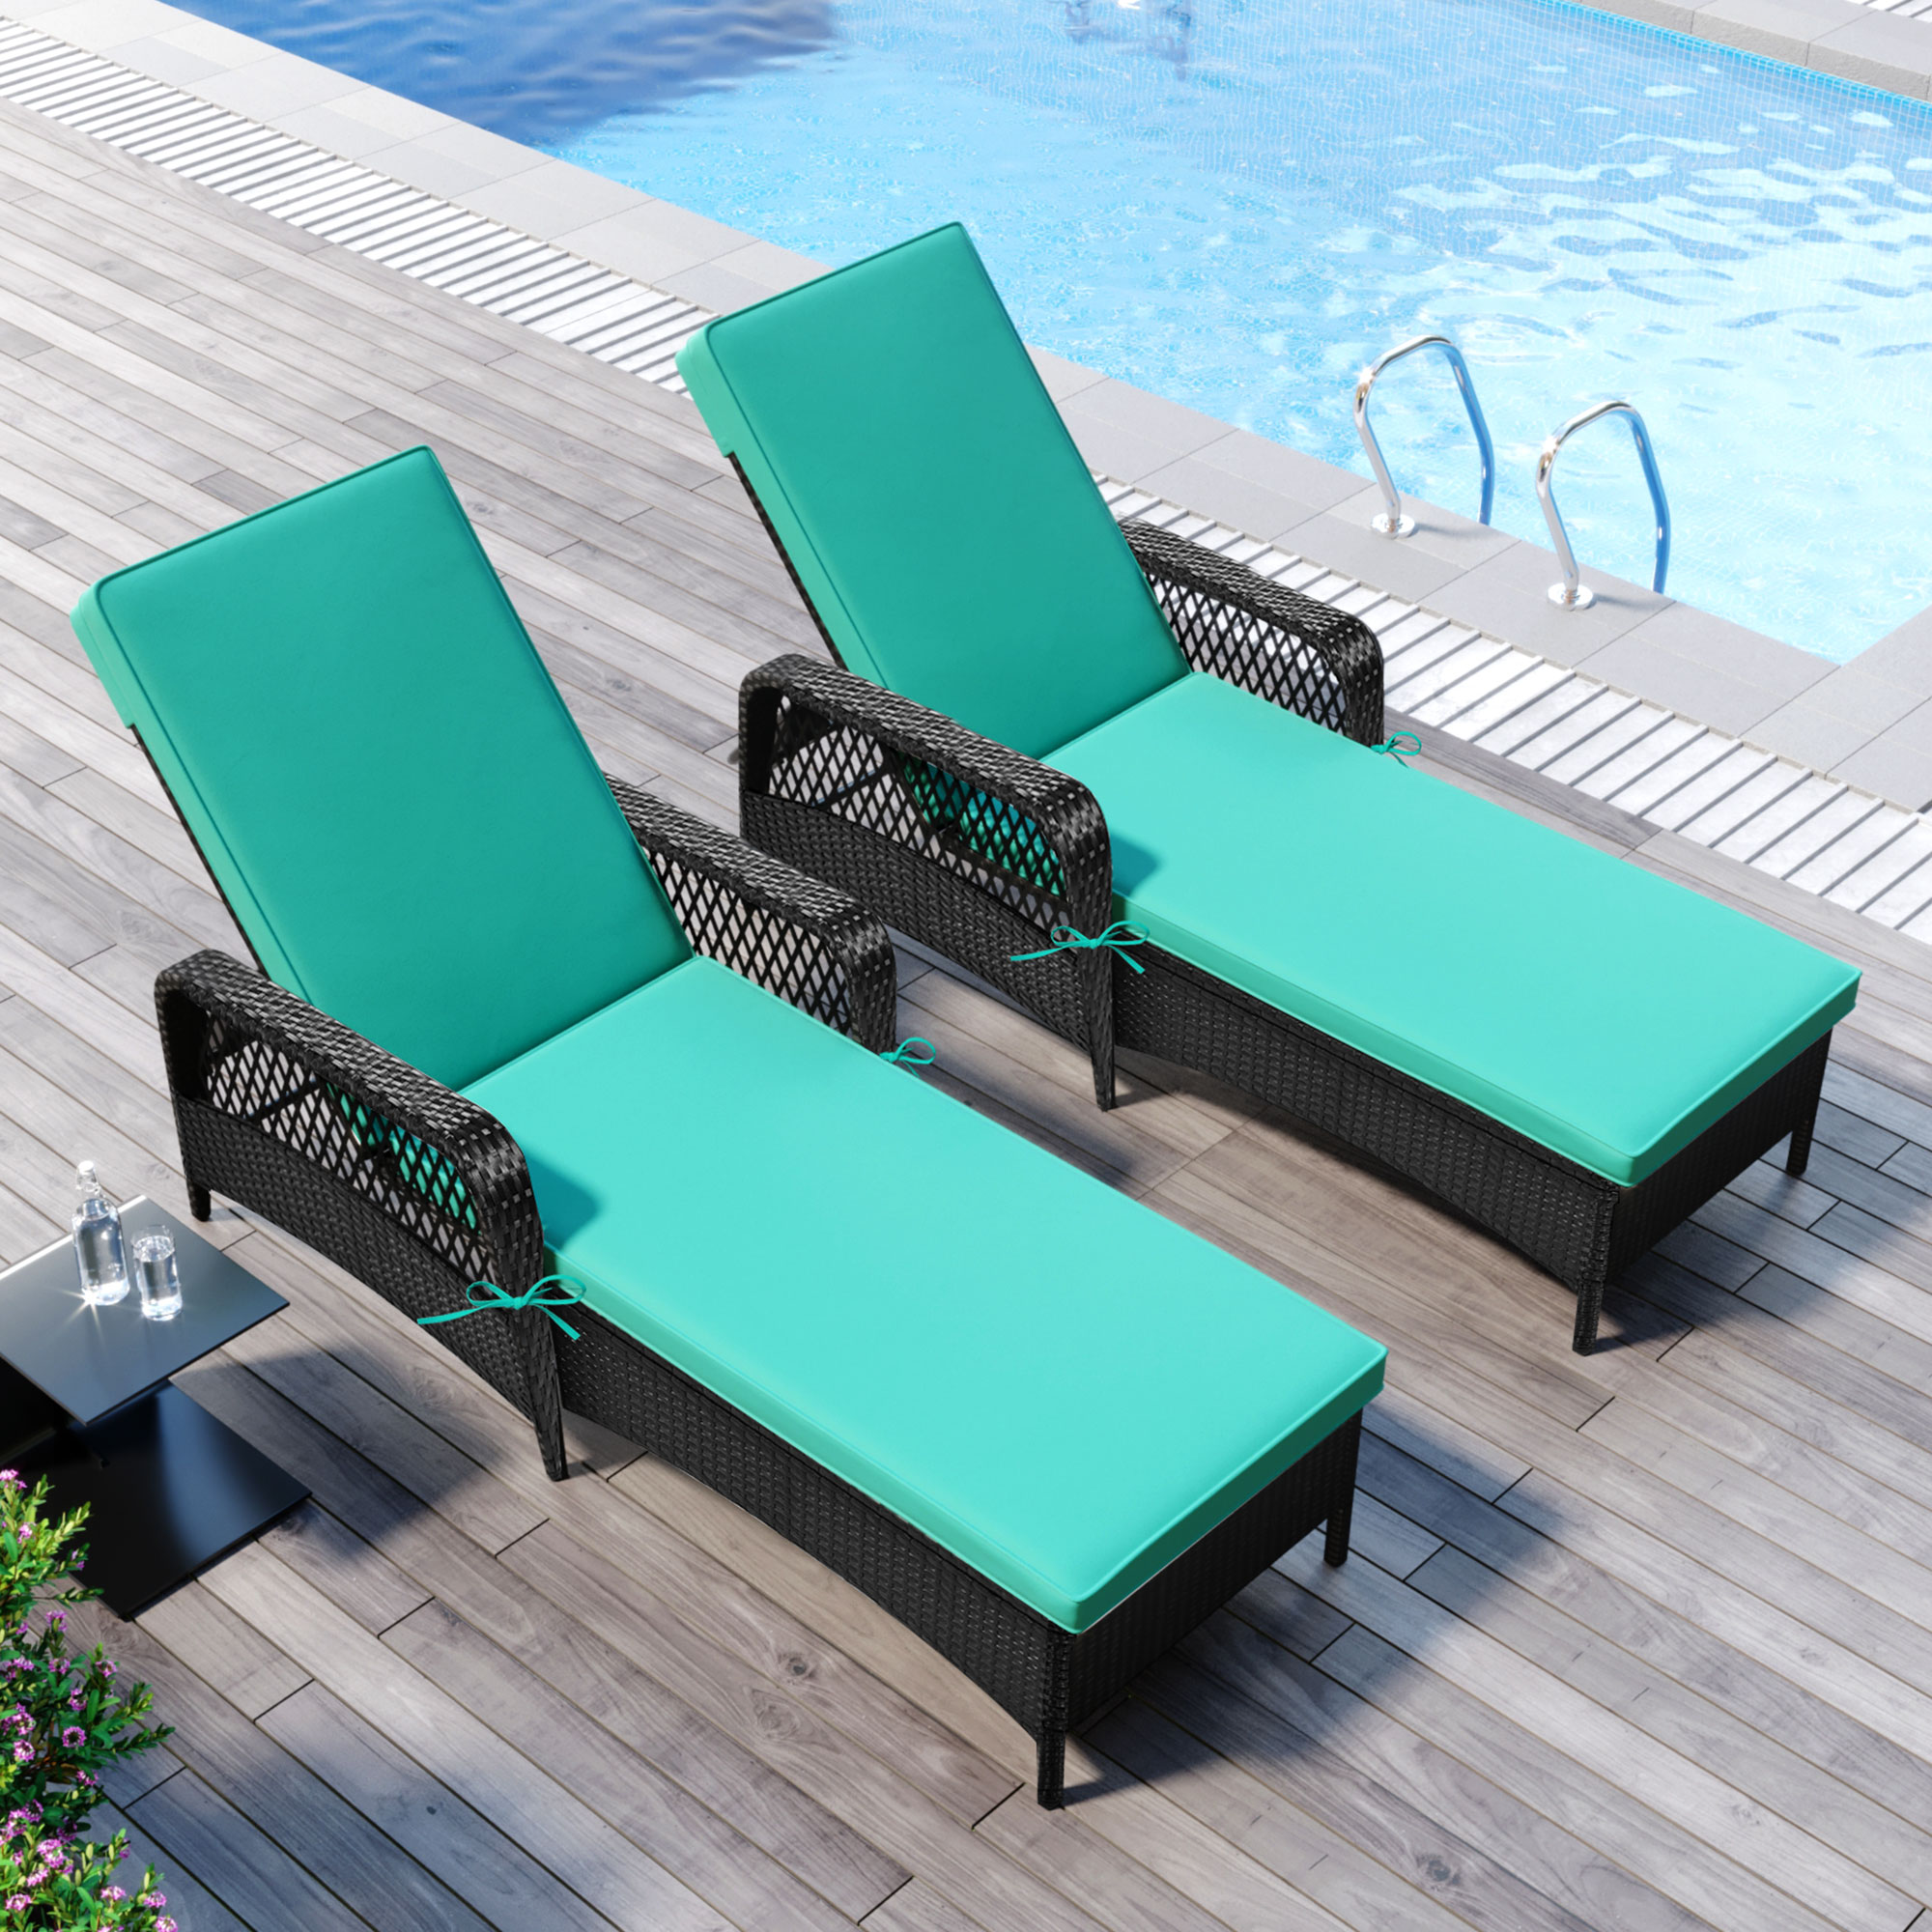 SYNGAR Outdoor Chaise Lounge Chairs, Patio Reclining Sun Lounger, PE Wicker Rattan Adjustable Lounge Chair with Thickened Cushion, Reclining Chair for Poolside, Deck, Backyard, 2 Pack, Green - image 4 of 11